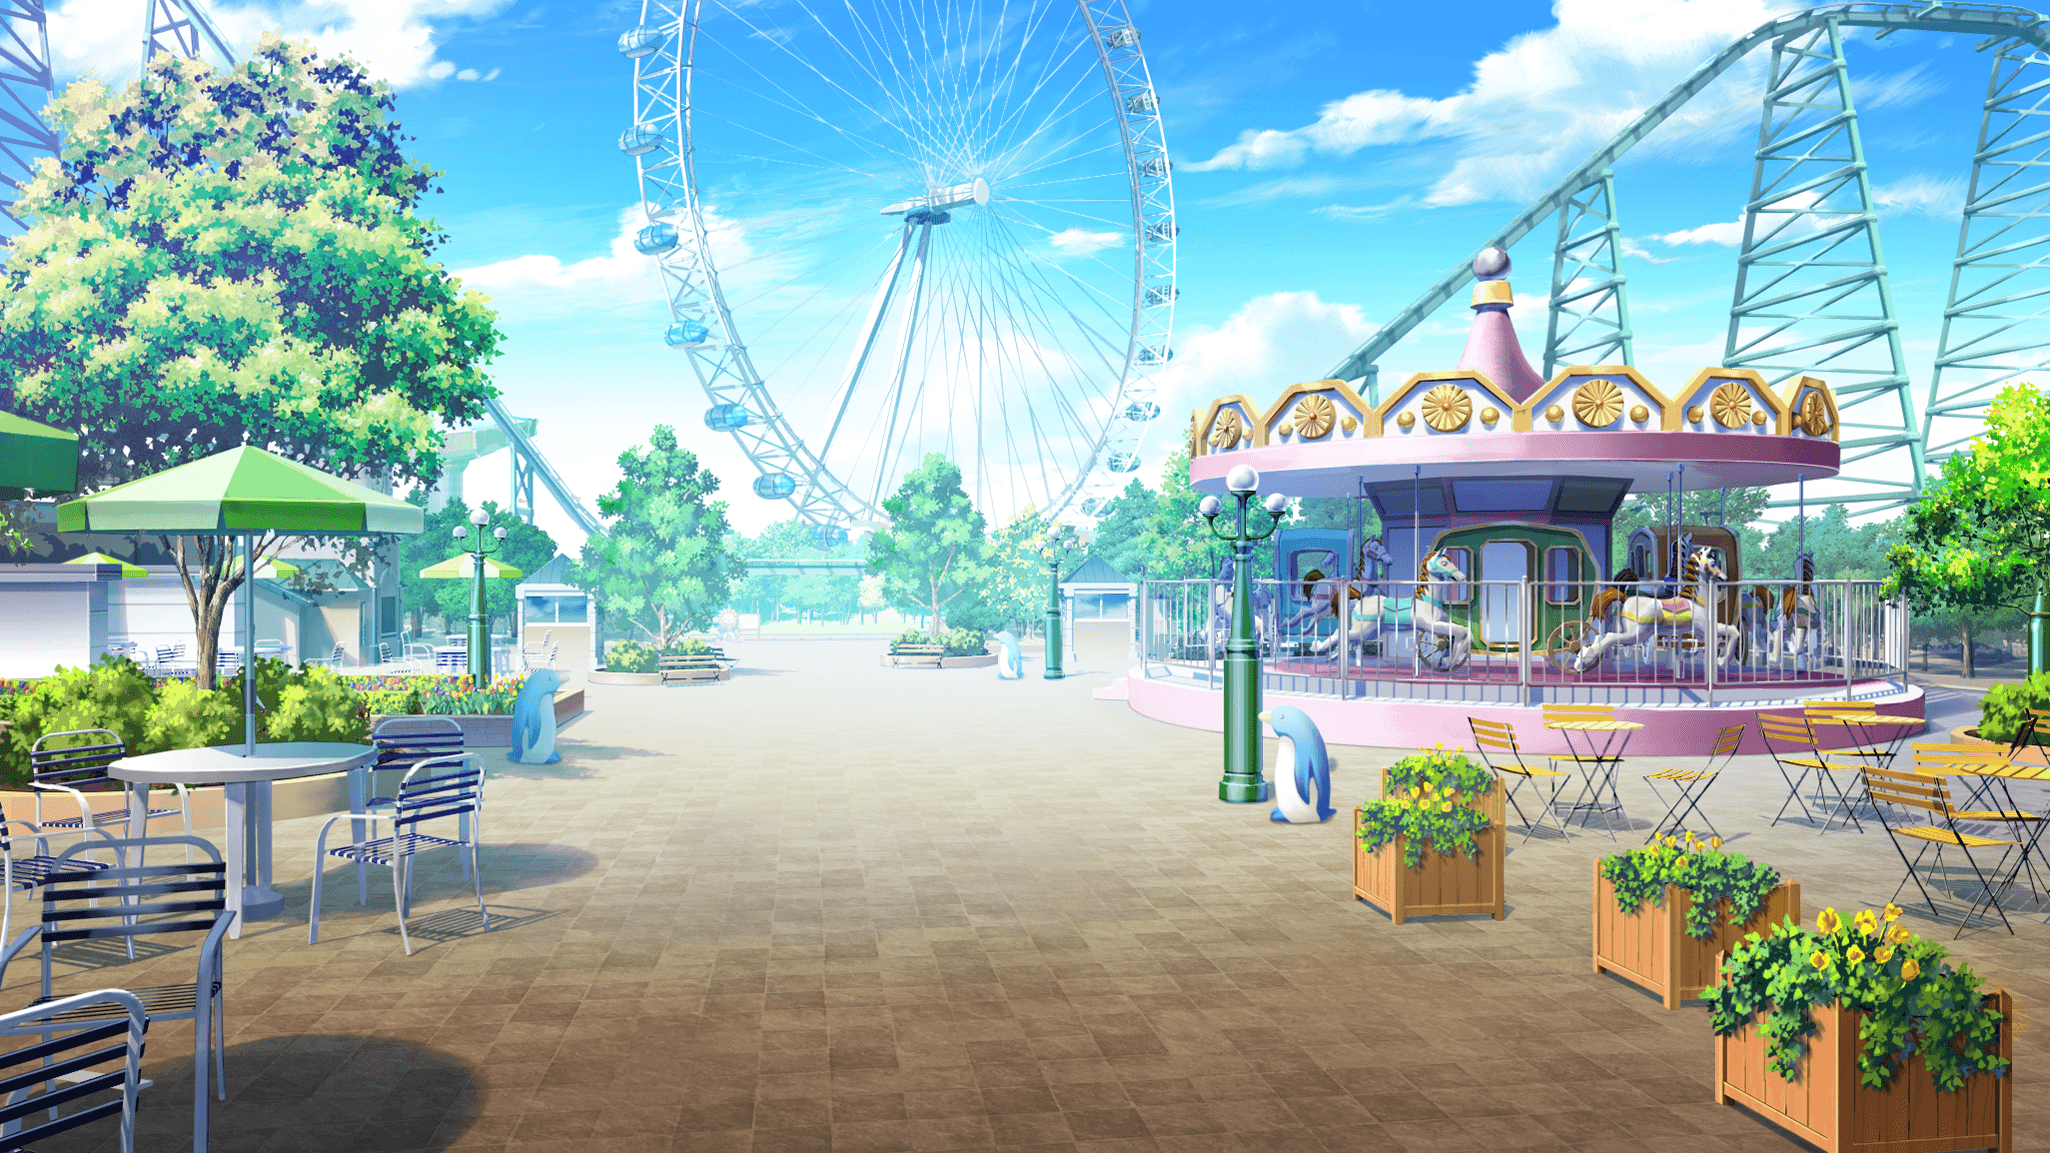 NYC Central park  Visual Novel Background by giaonp  Scenery background  Anime scenery Episode backgrounds